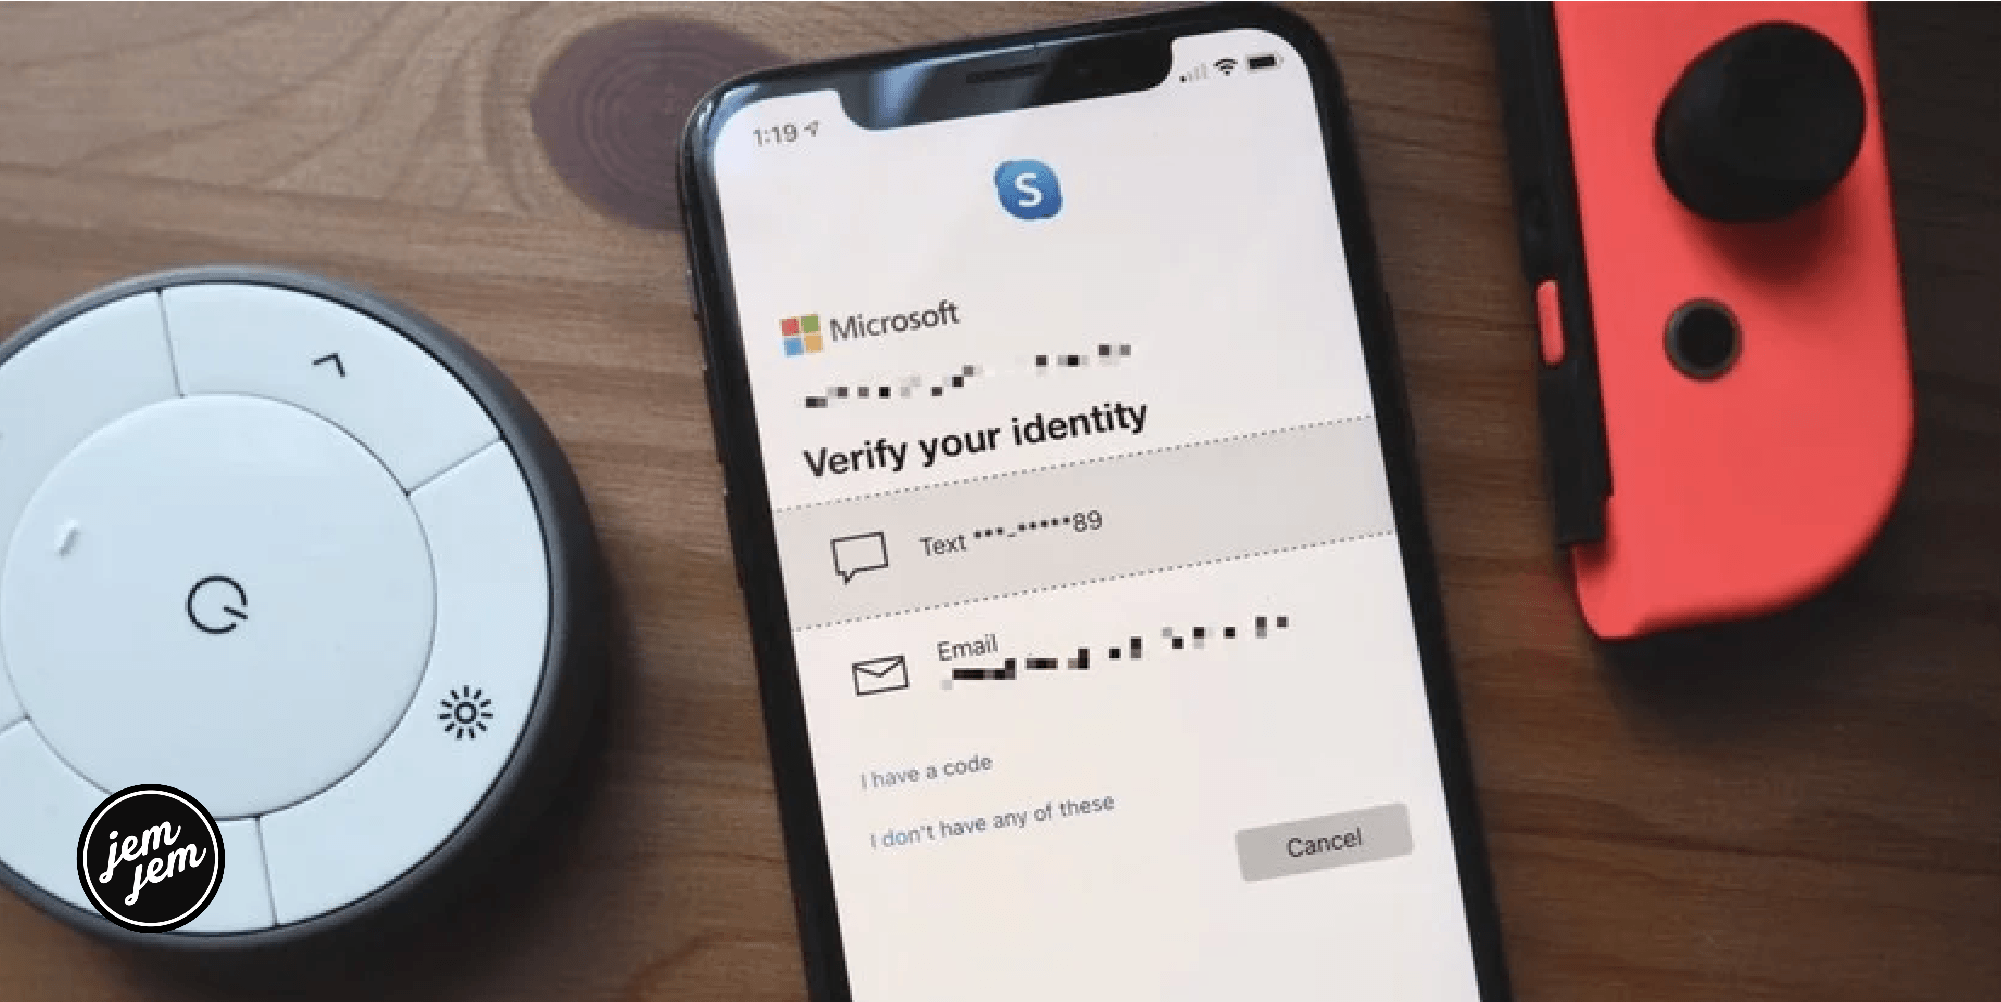 How to set up two-factor authentication for your Skype account